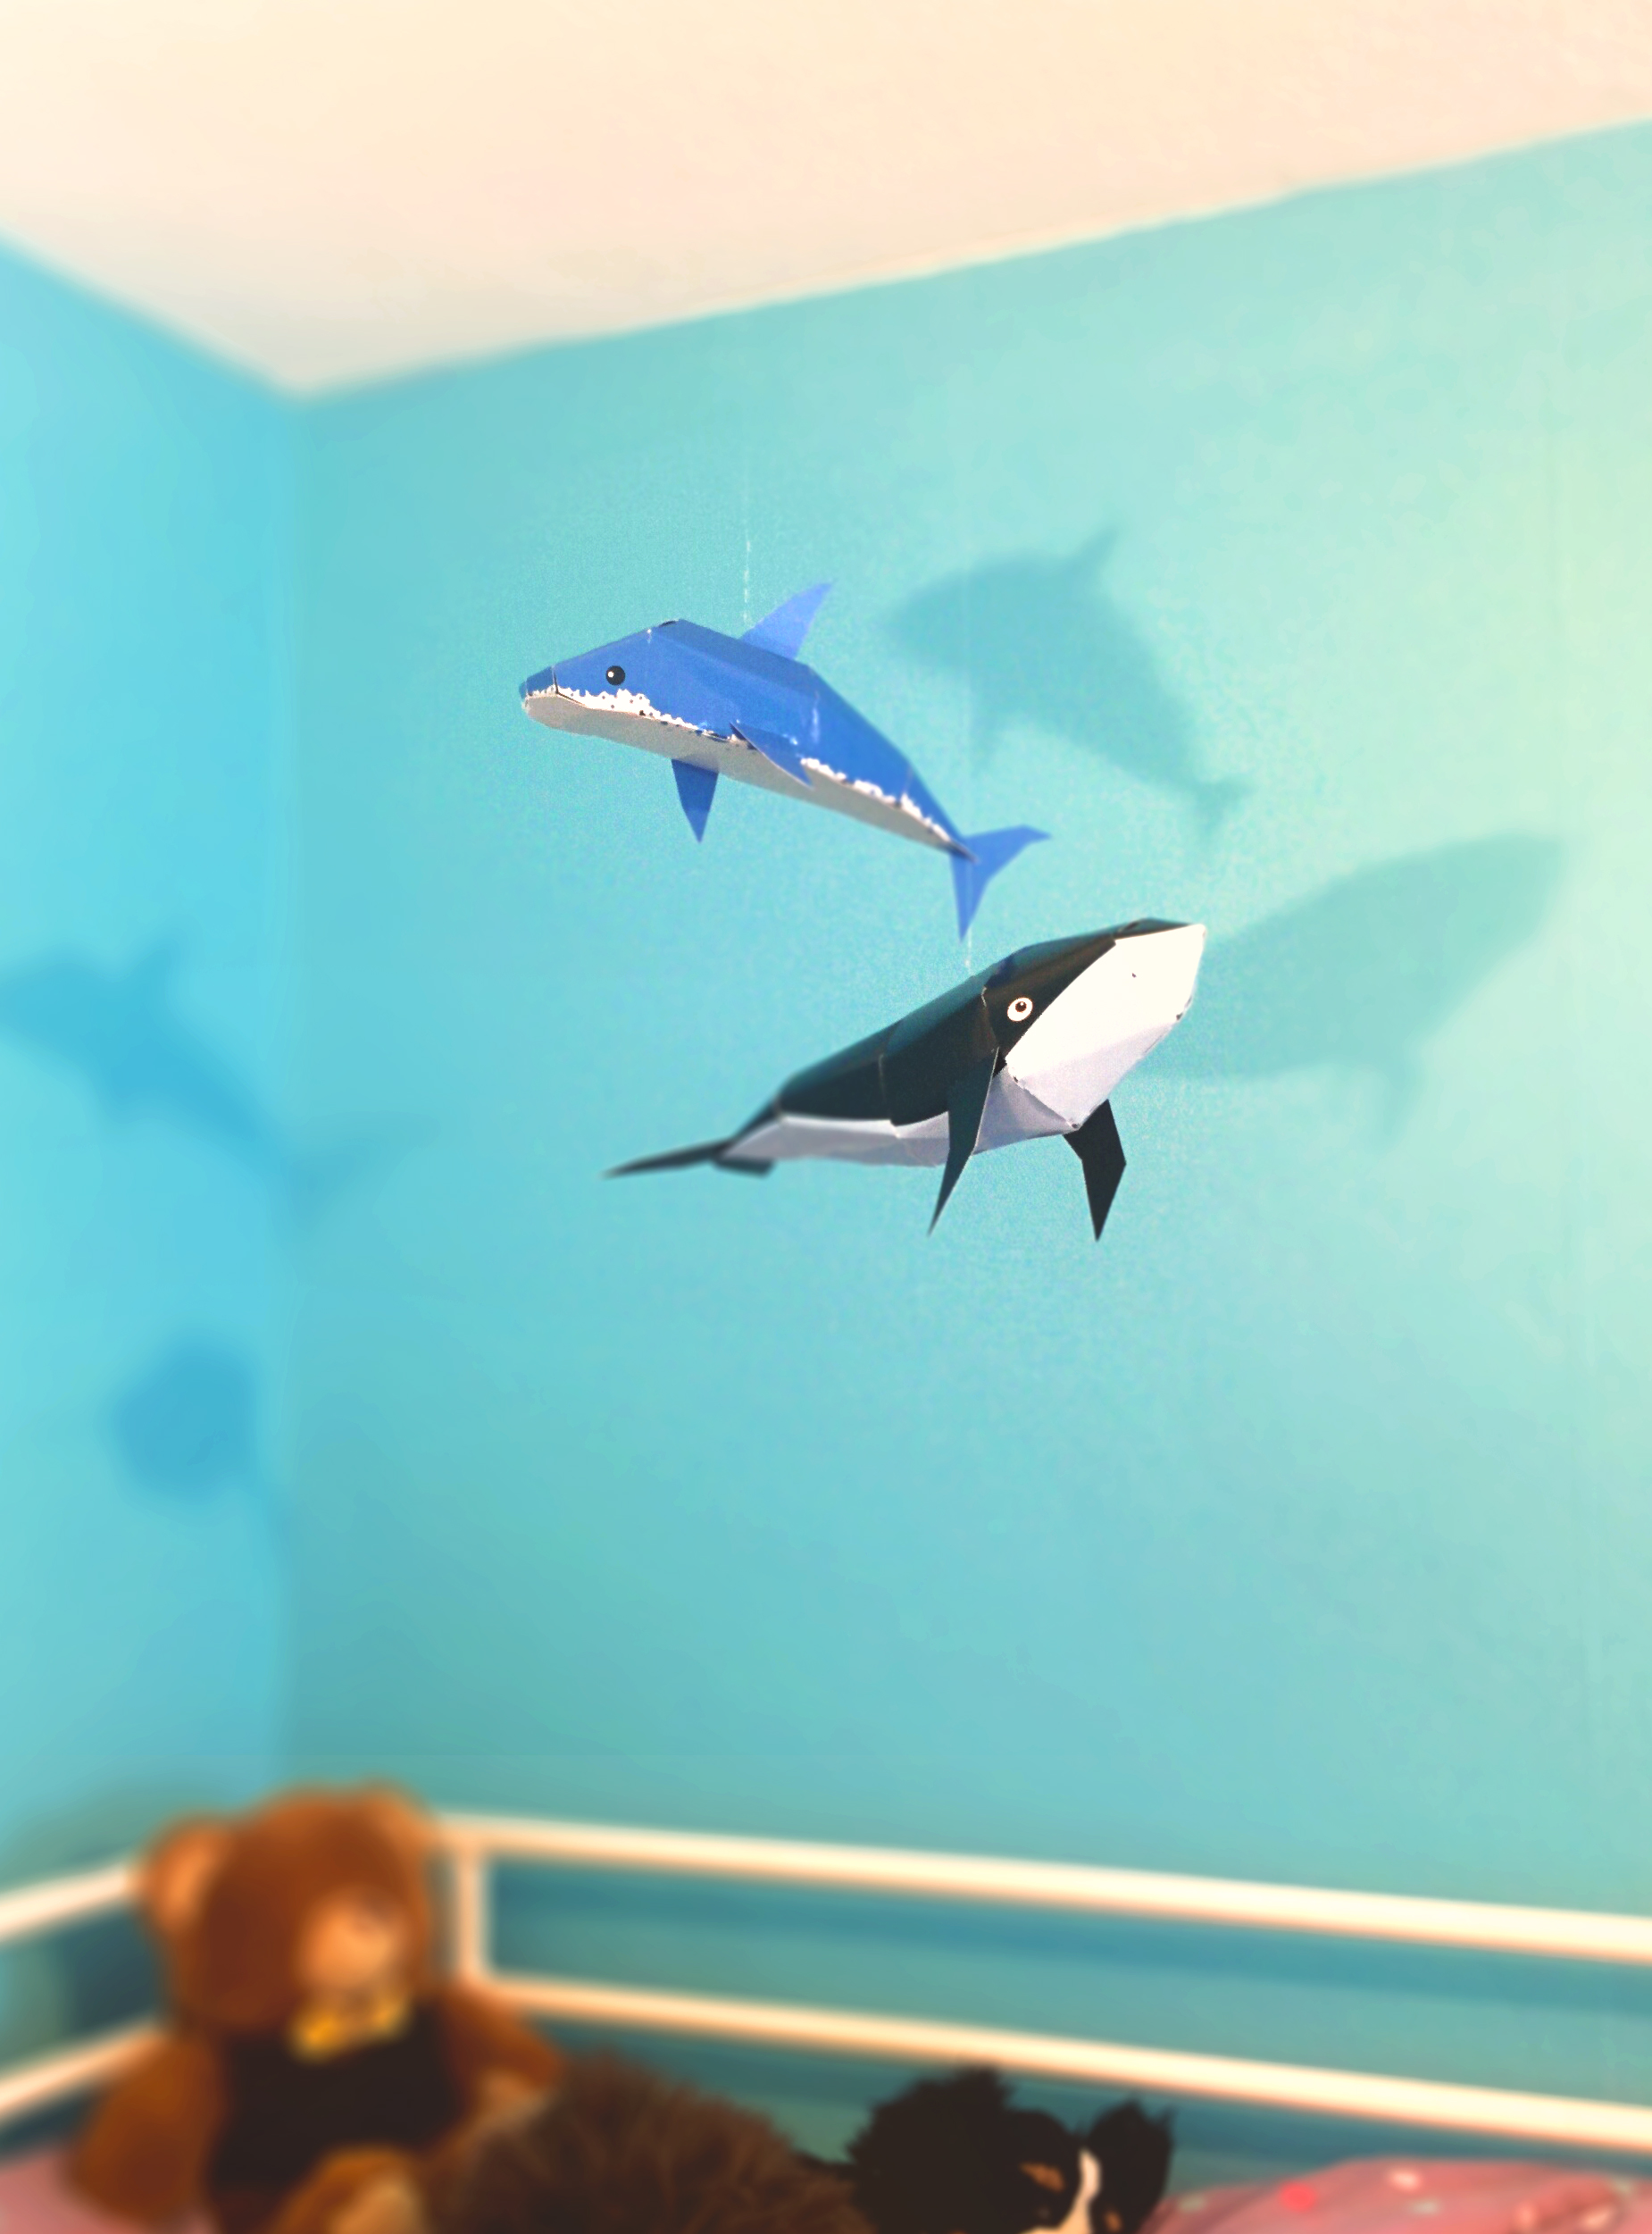 Installation "Shark" and "Wahle"